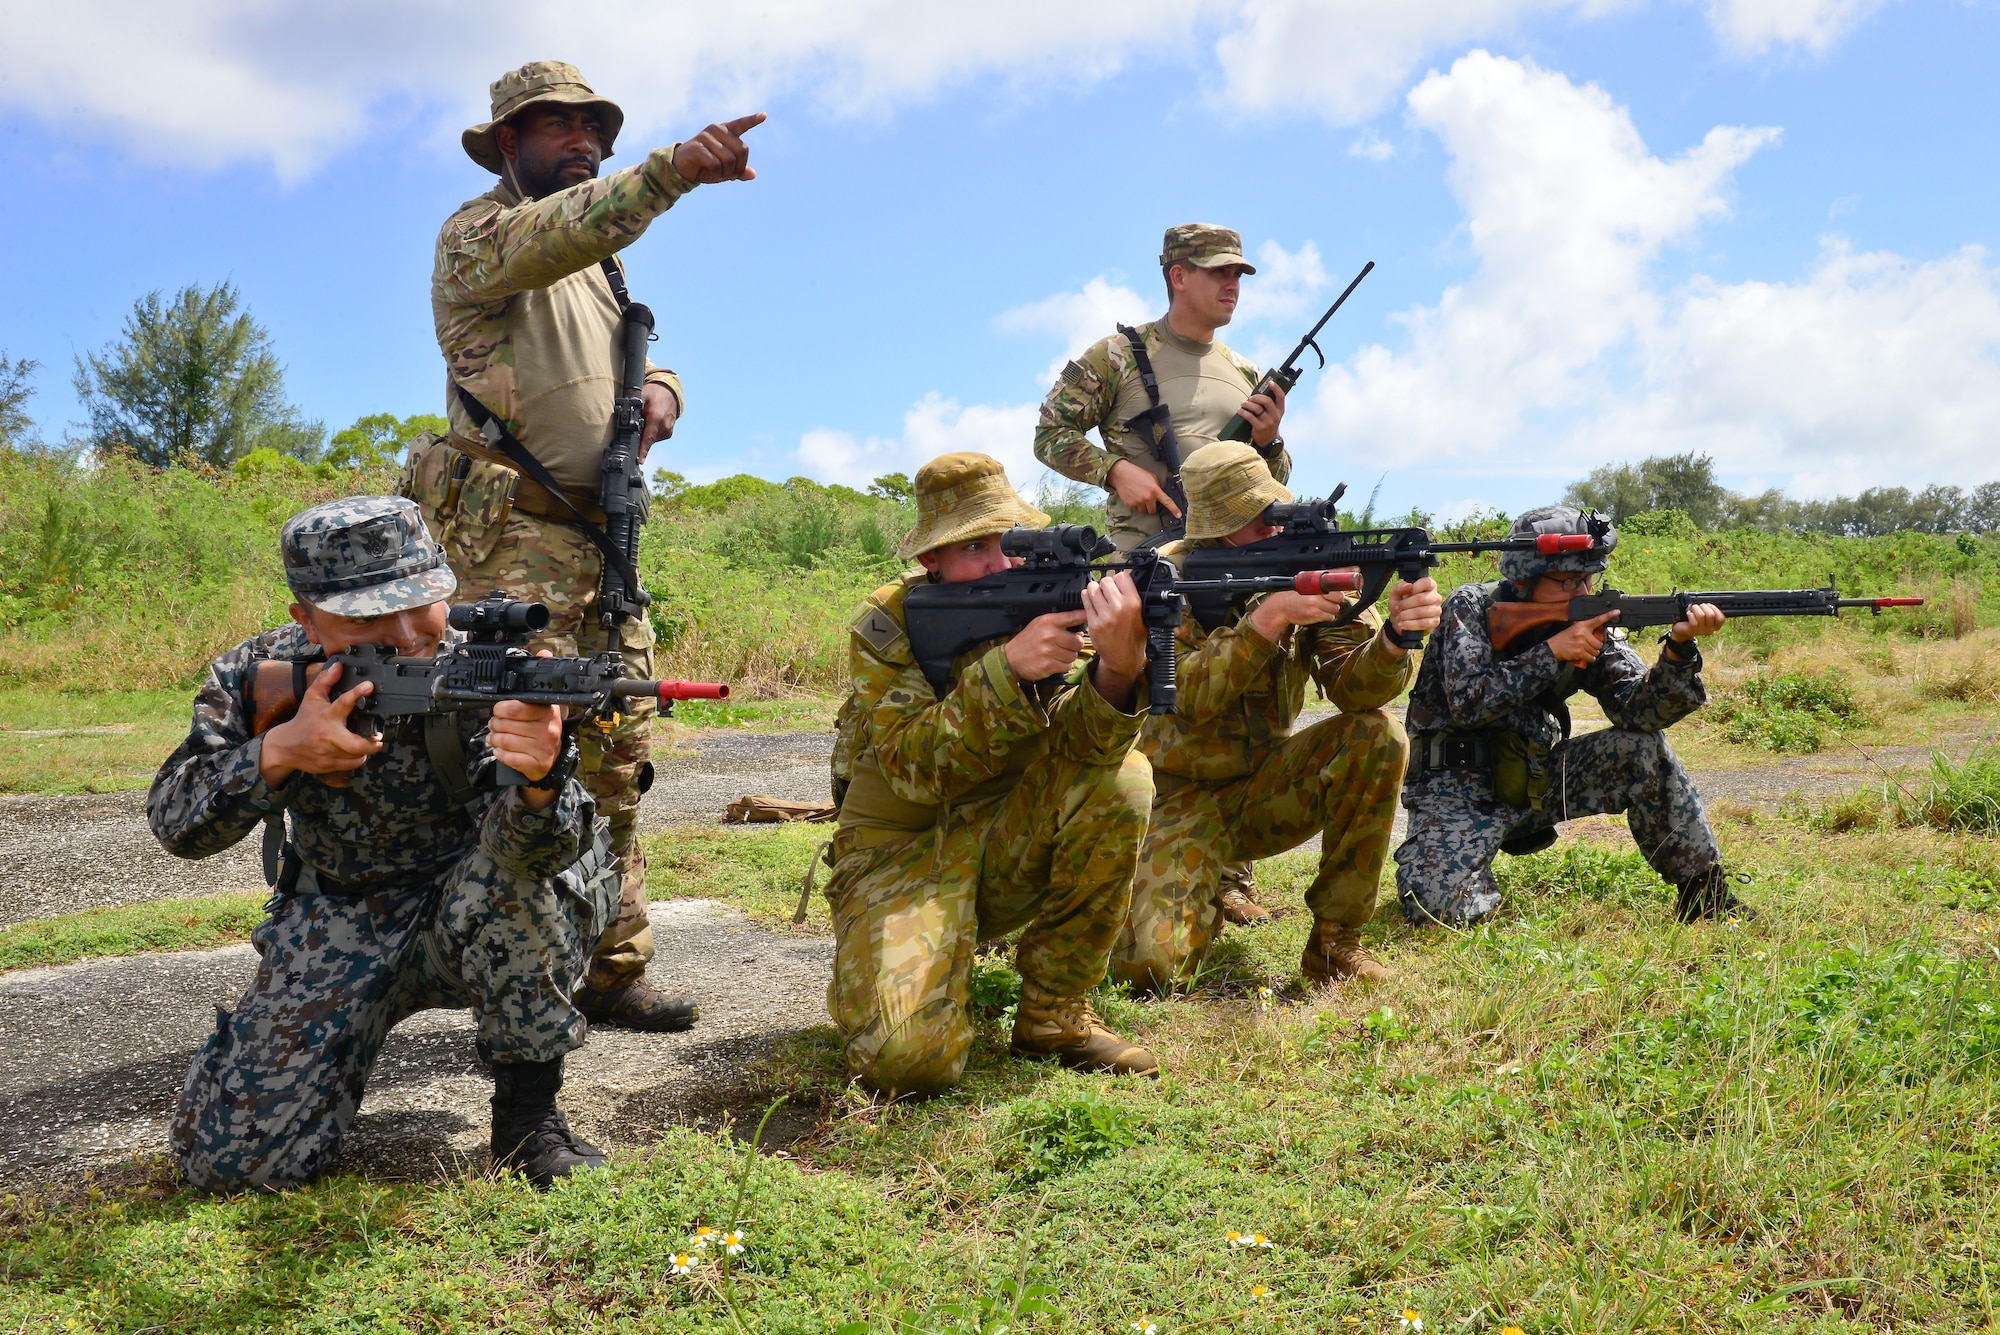 U.S. Air Force (USAF), Koku Jieitai (Japan Air Self-Defense) and Royal Australian Air Force (RAAF) members defend a perimeter during a training scenario in exercise COPE NORTH 18 at Tinian, U.S. Commonwealth of the Northern Marianas Islands, Feb. 20. Through exercises and engagements during COPE NORTH, USAF, Koku Jieitai and RAAF increase interoperability for humanitarian assistance/disaster relief operations. (U.S. Air Force photo by Airman 1st Class Christopher Quail)